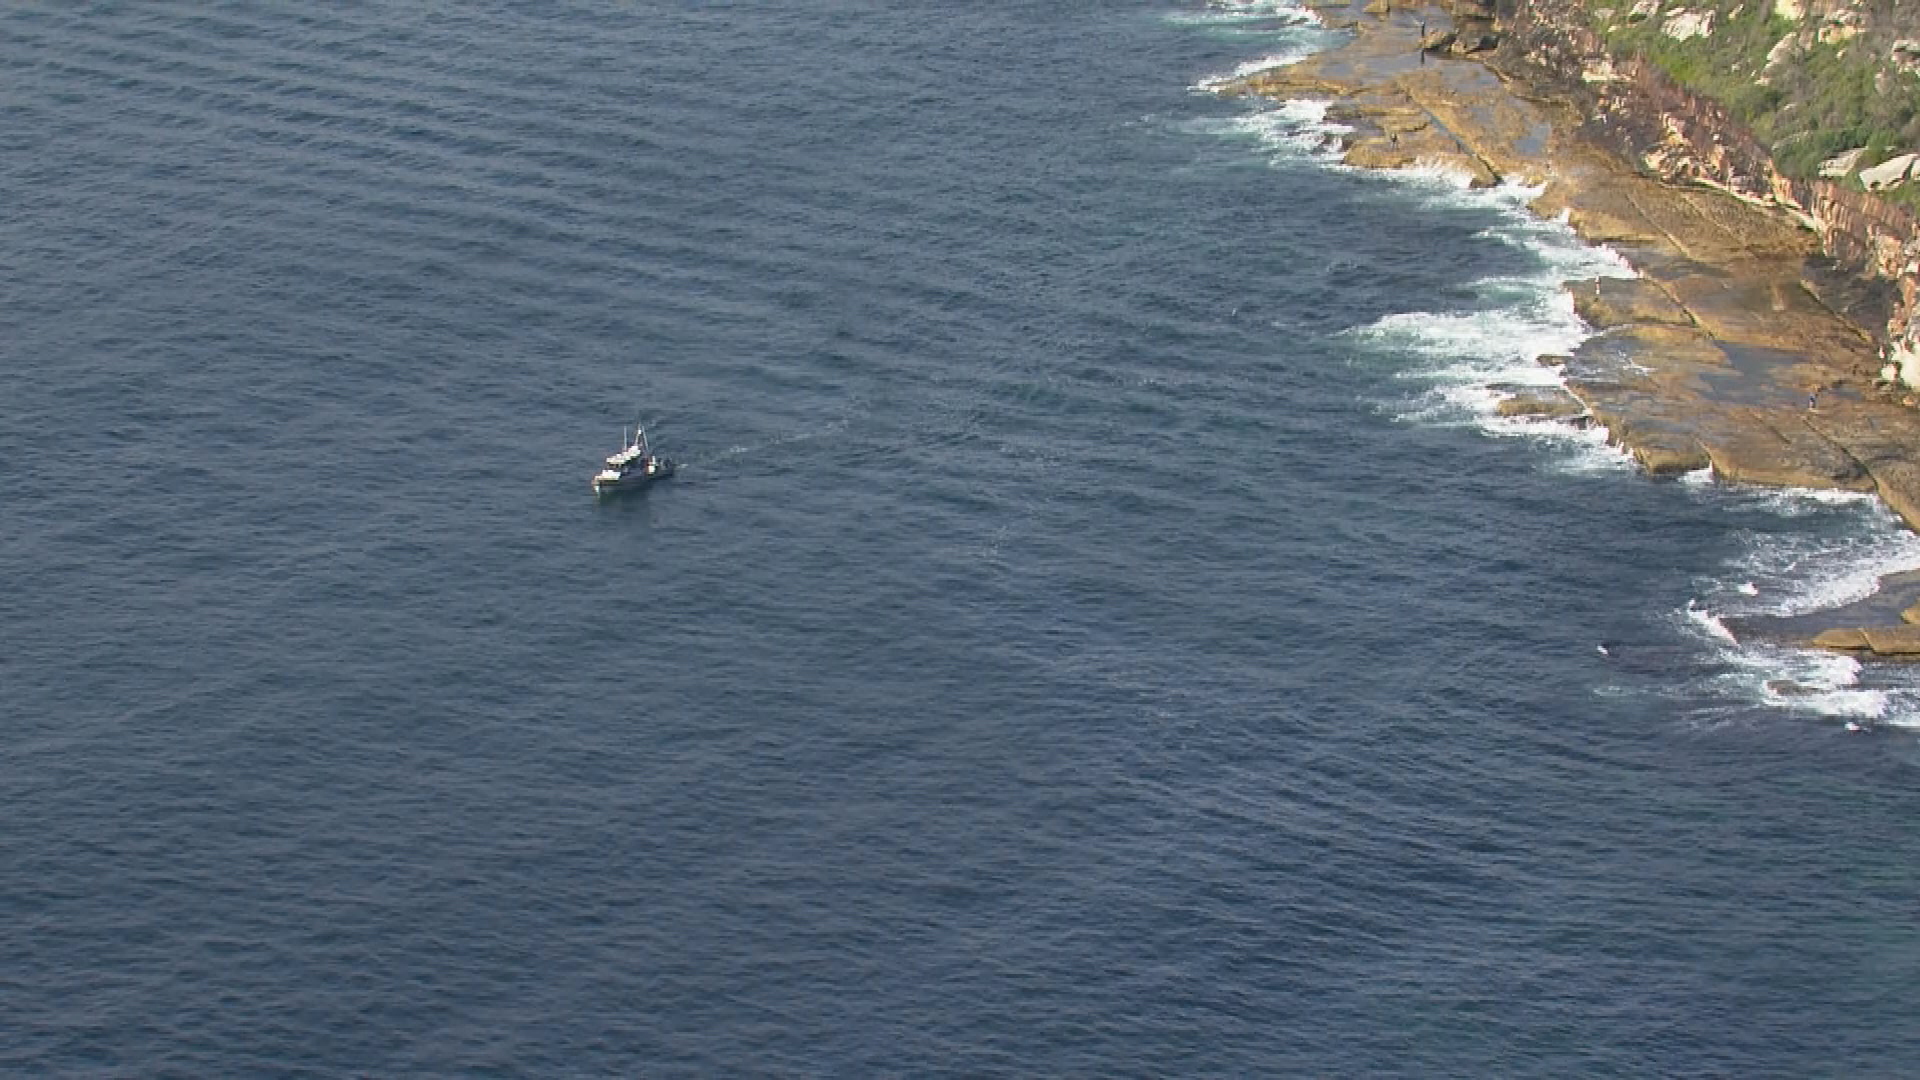 Search underway for missing man after boat capsizes in Sydney